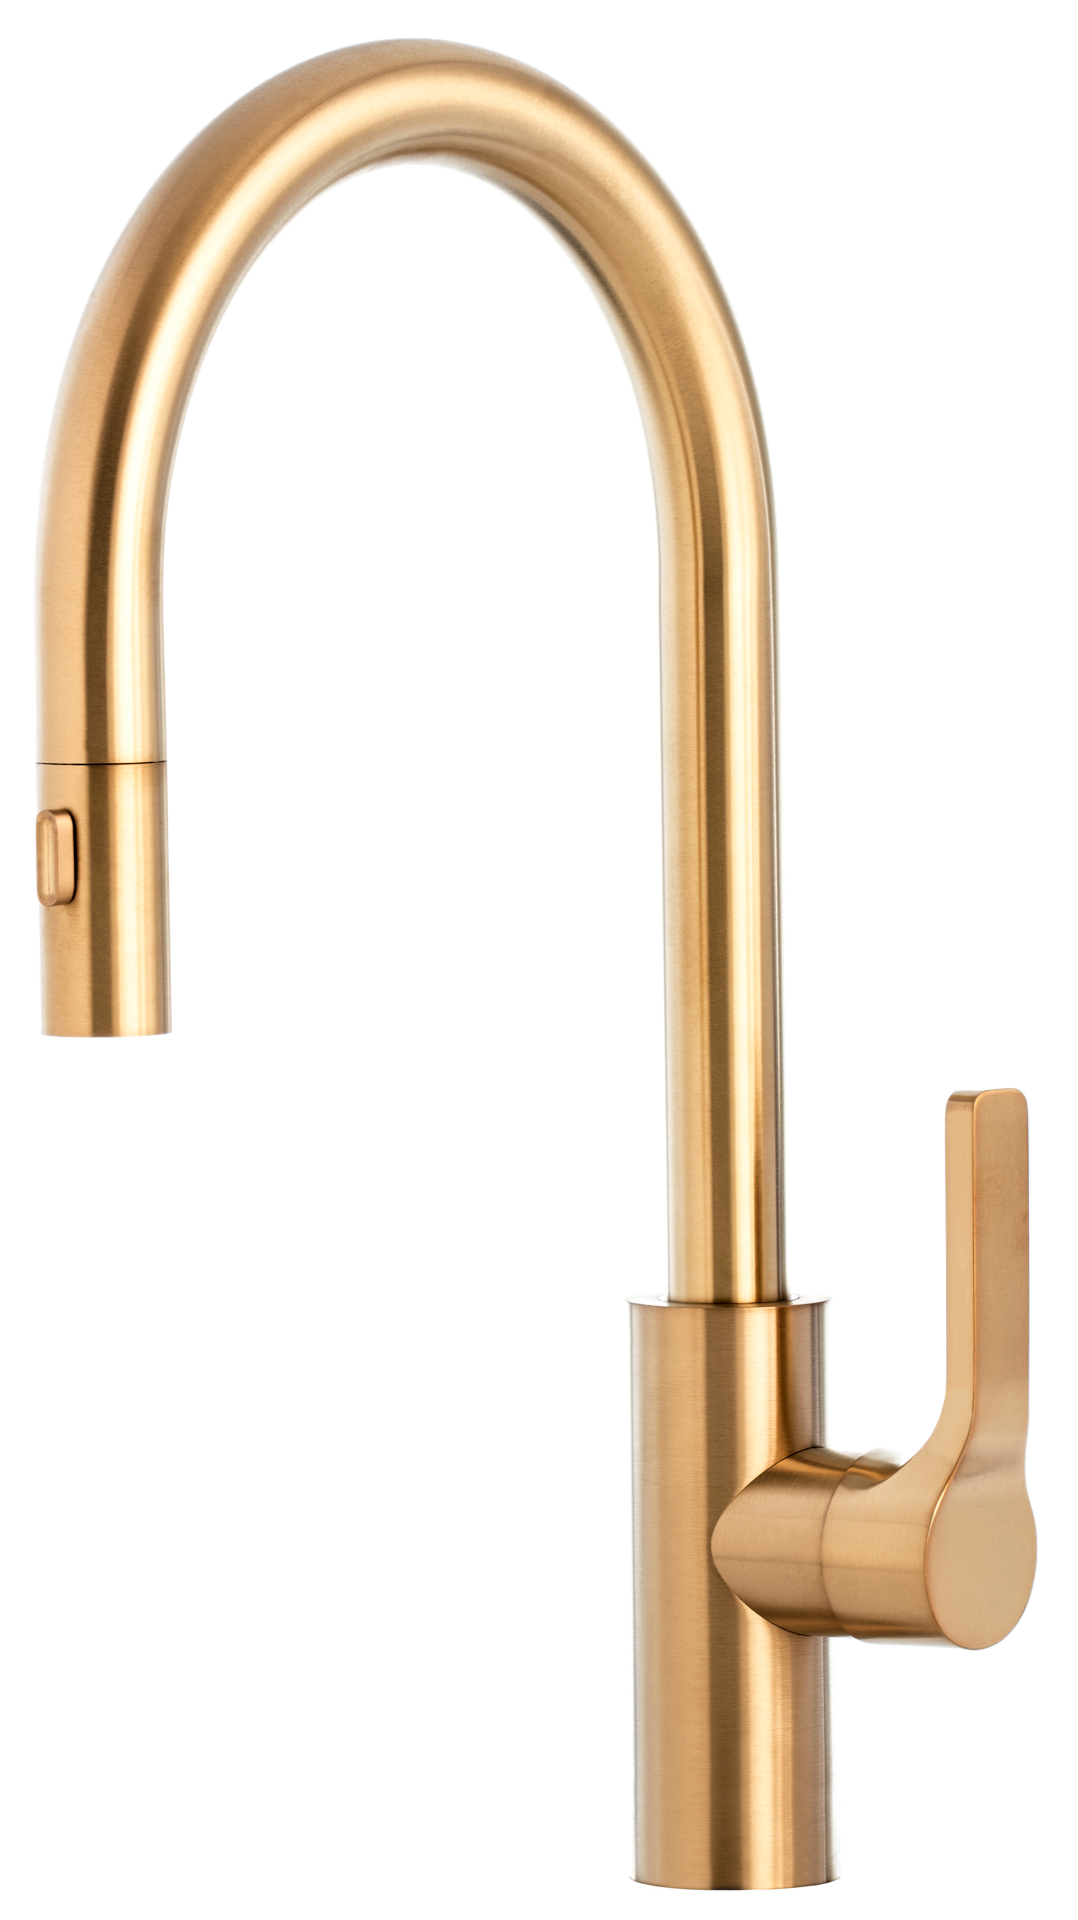 The Galley Ideal Tap High Flow with Water Filtration System